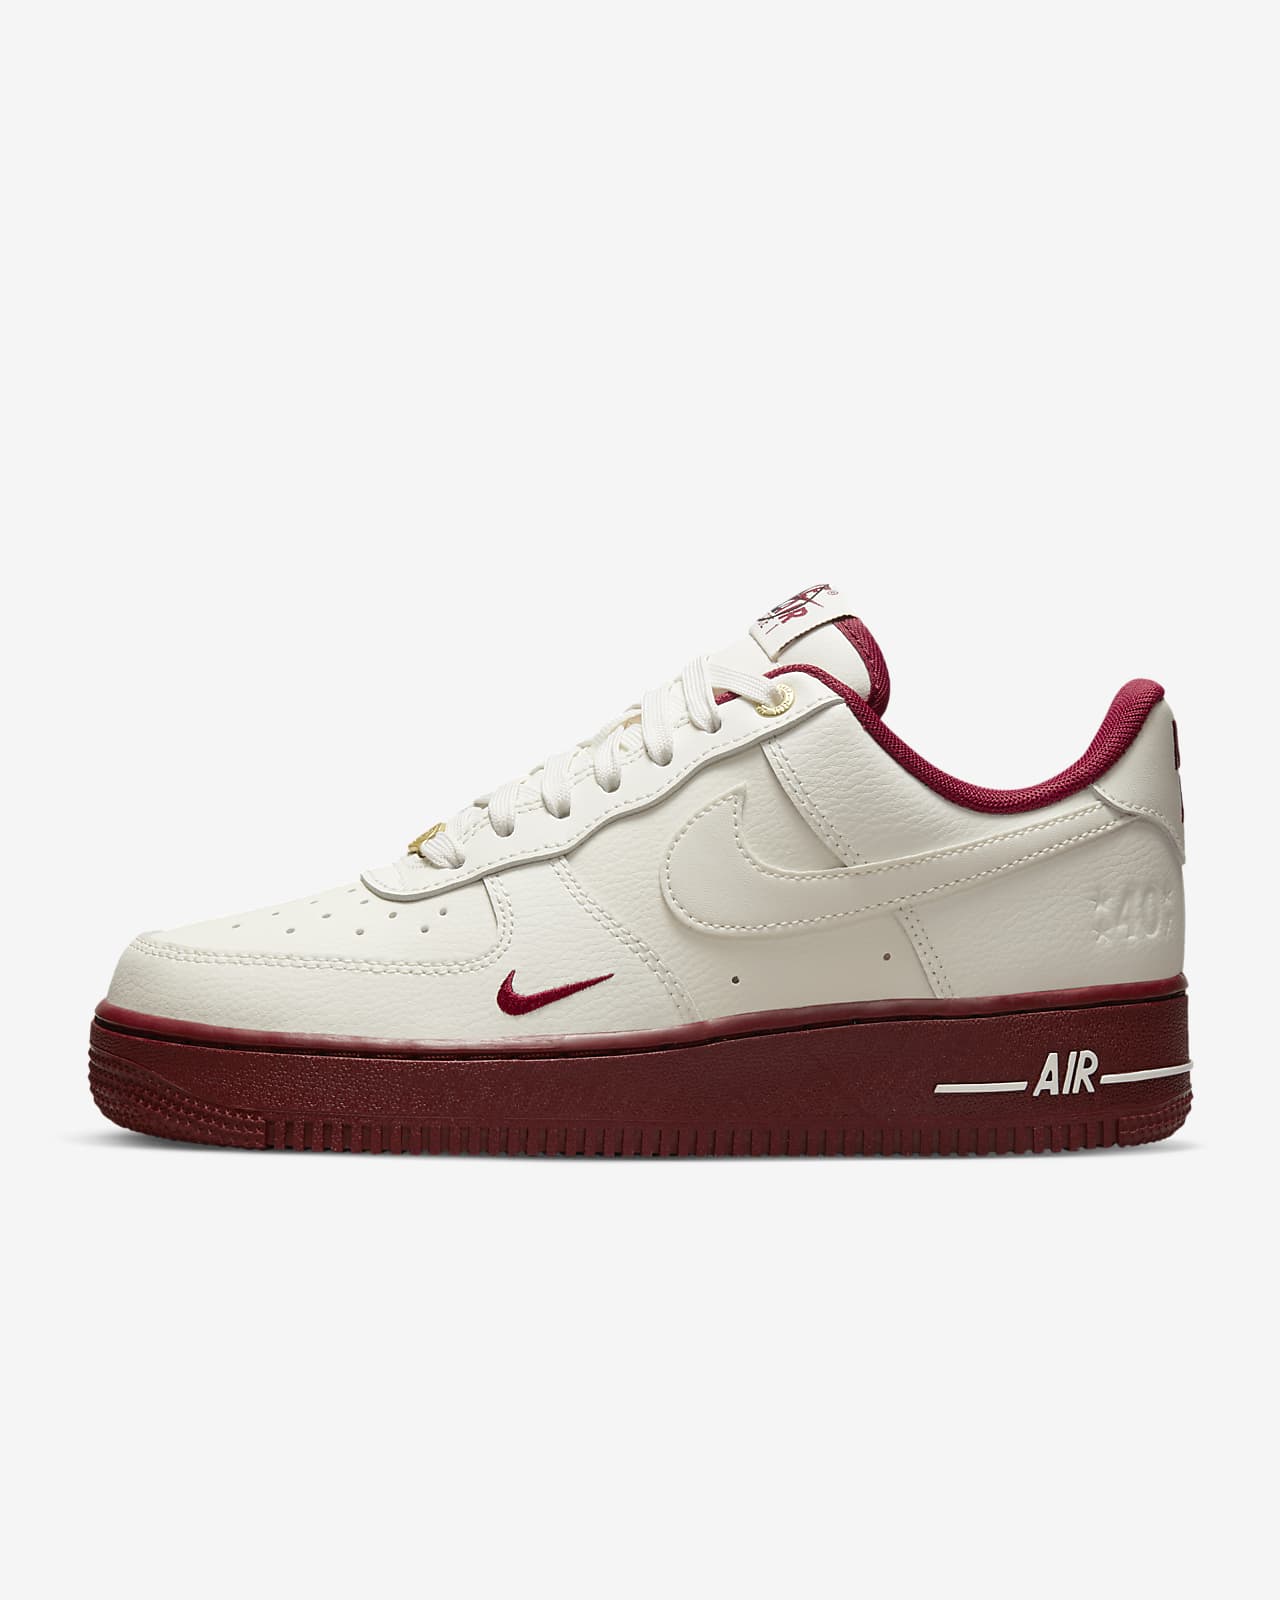 Chaussure Nike Air Force 1 '07 SE pour femme